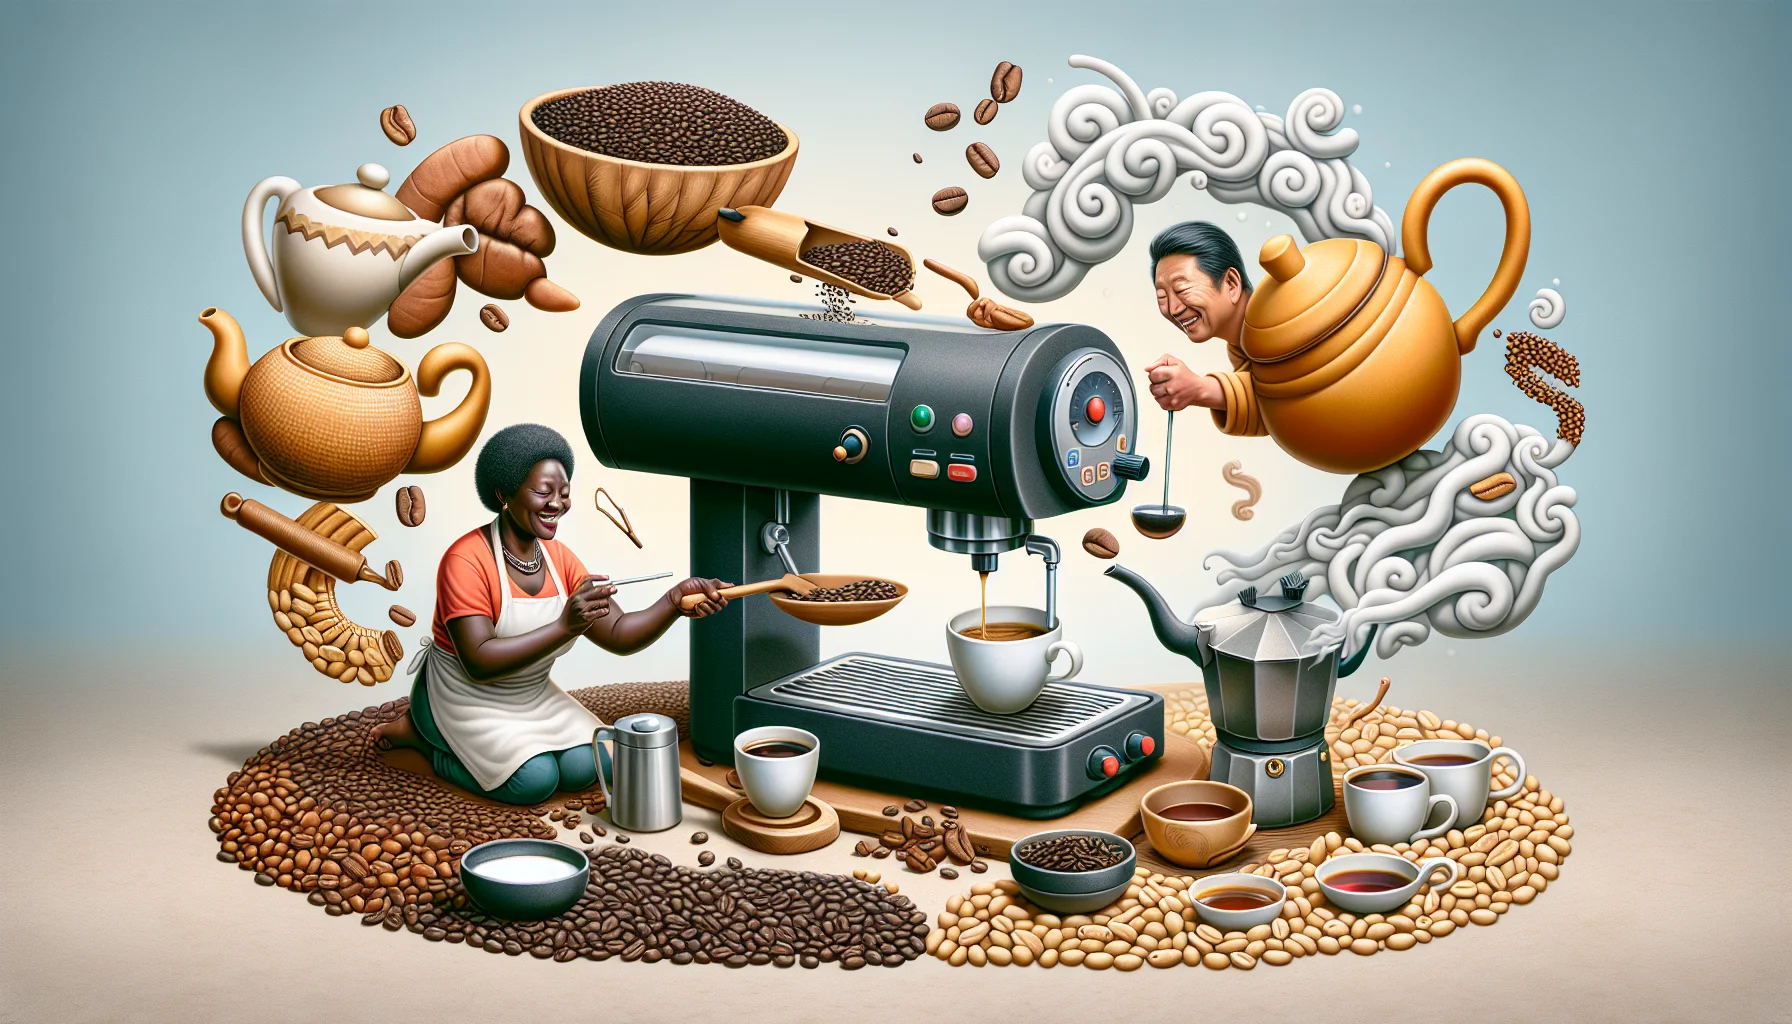 Create an amusing, realistic scene where life is metaphorically brewing into a masterpiece. In the foreground, an African woman is meticulously brewing coffee with an espresso machine, displaying a sense of mastery over her craft. Nearby, an Asian man is carefully preparing tea using a traditional teapot, his movements skilled and precise. The background is filled with an array of tea and coffee products arranged in a quirky manner - coffee beans form a smiling face and tea leaves shape a playful heart, creating an enticing atmosphere that mirrors the levity of life.